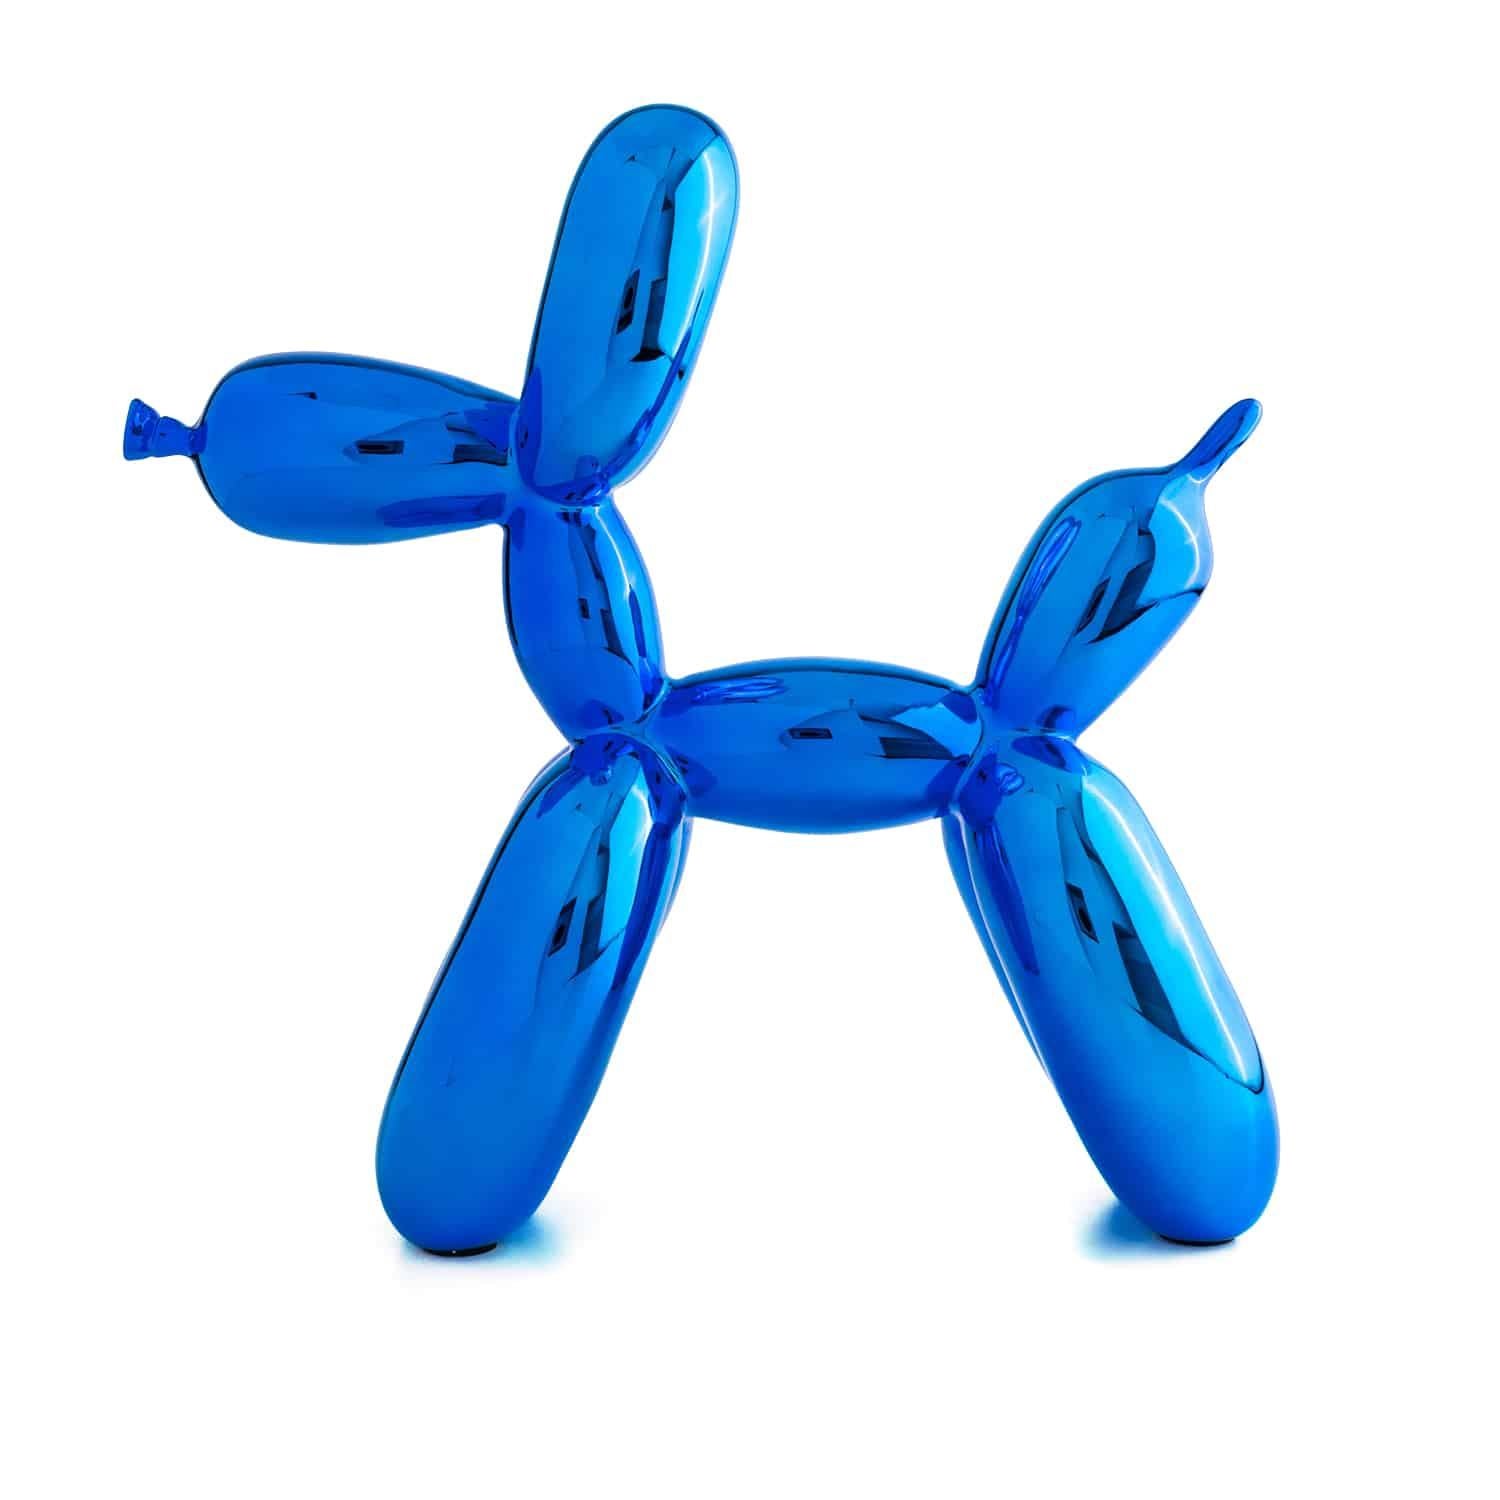 Balloon Dog ( After )  - Blue  - Sculpture by After Jeff Koons